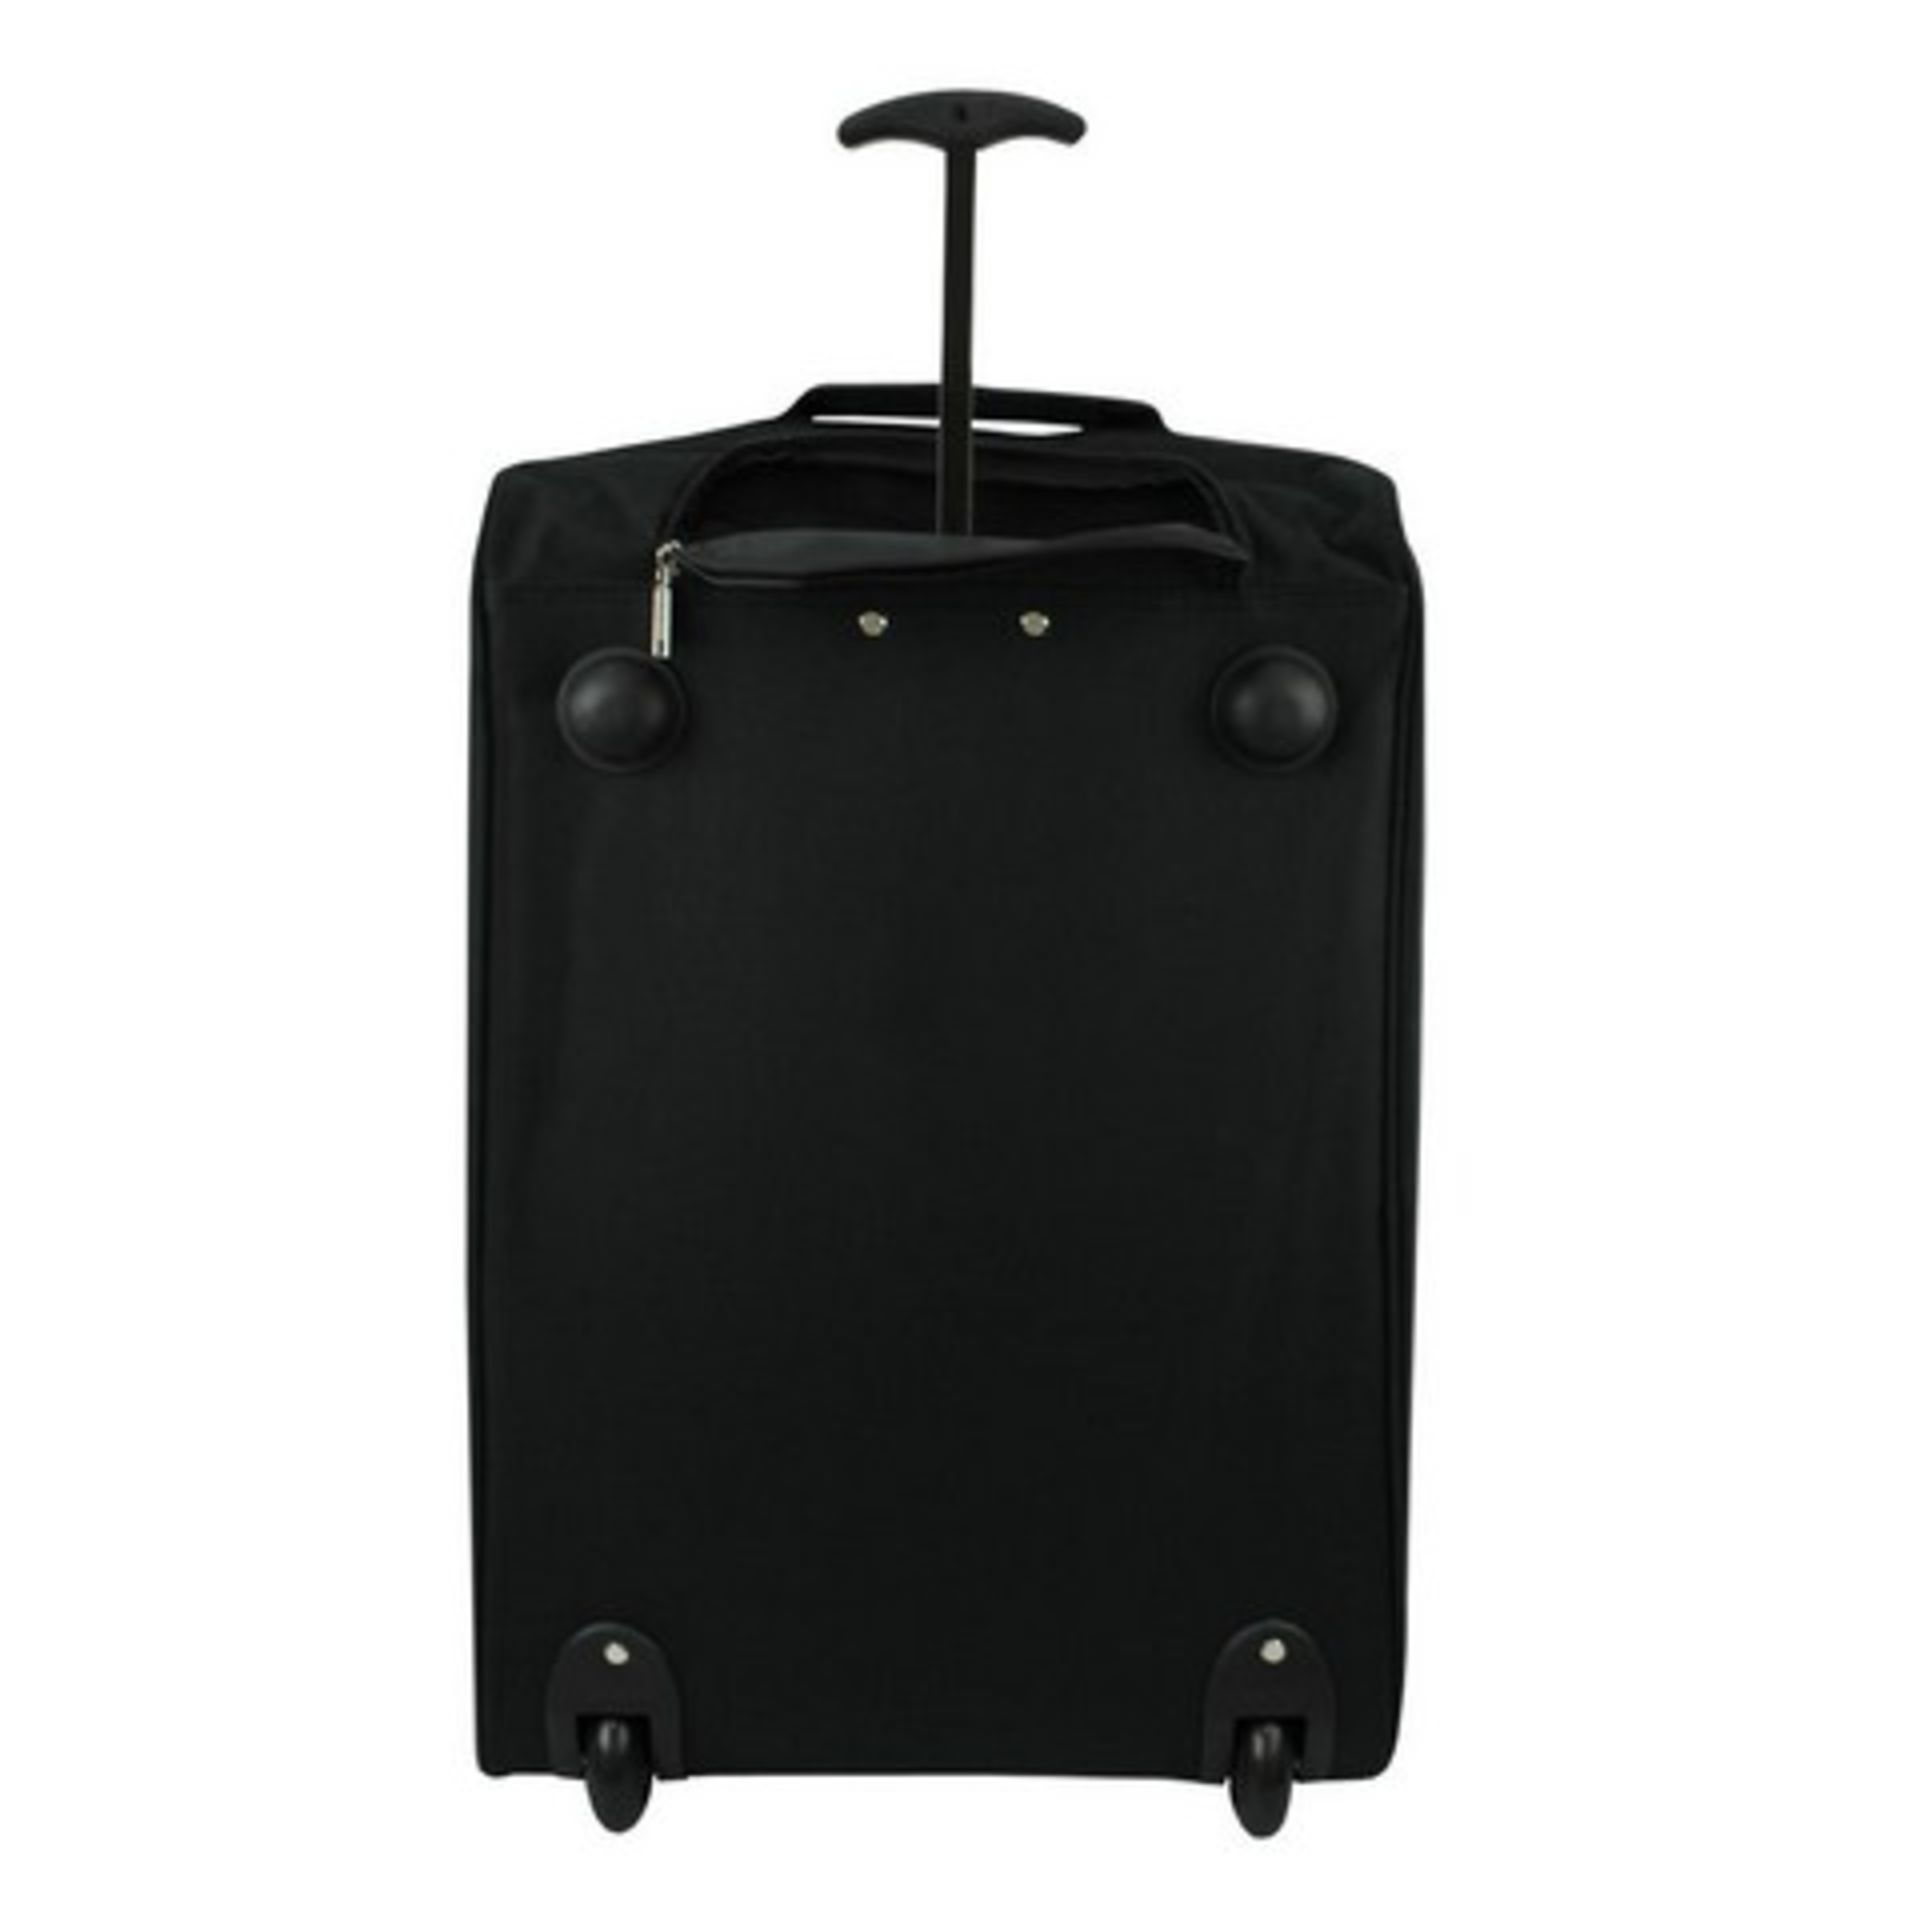 V Brand New Aircraft Cabin Sized - Super Lightweight Trolley Case In Black/Grey 33 Litre - Image 2 of 2